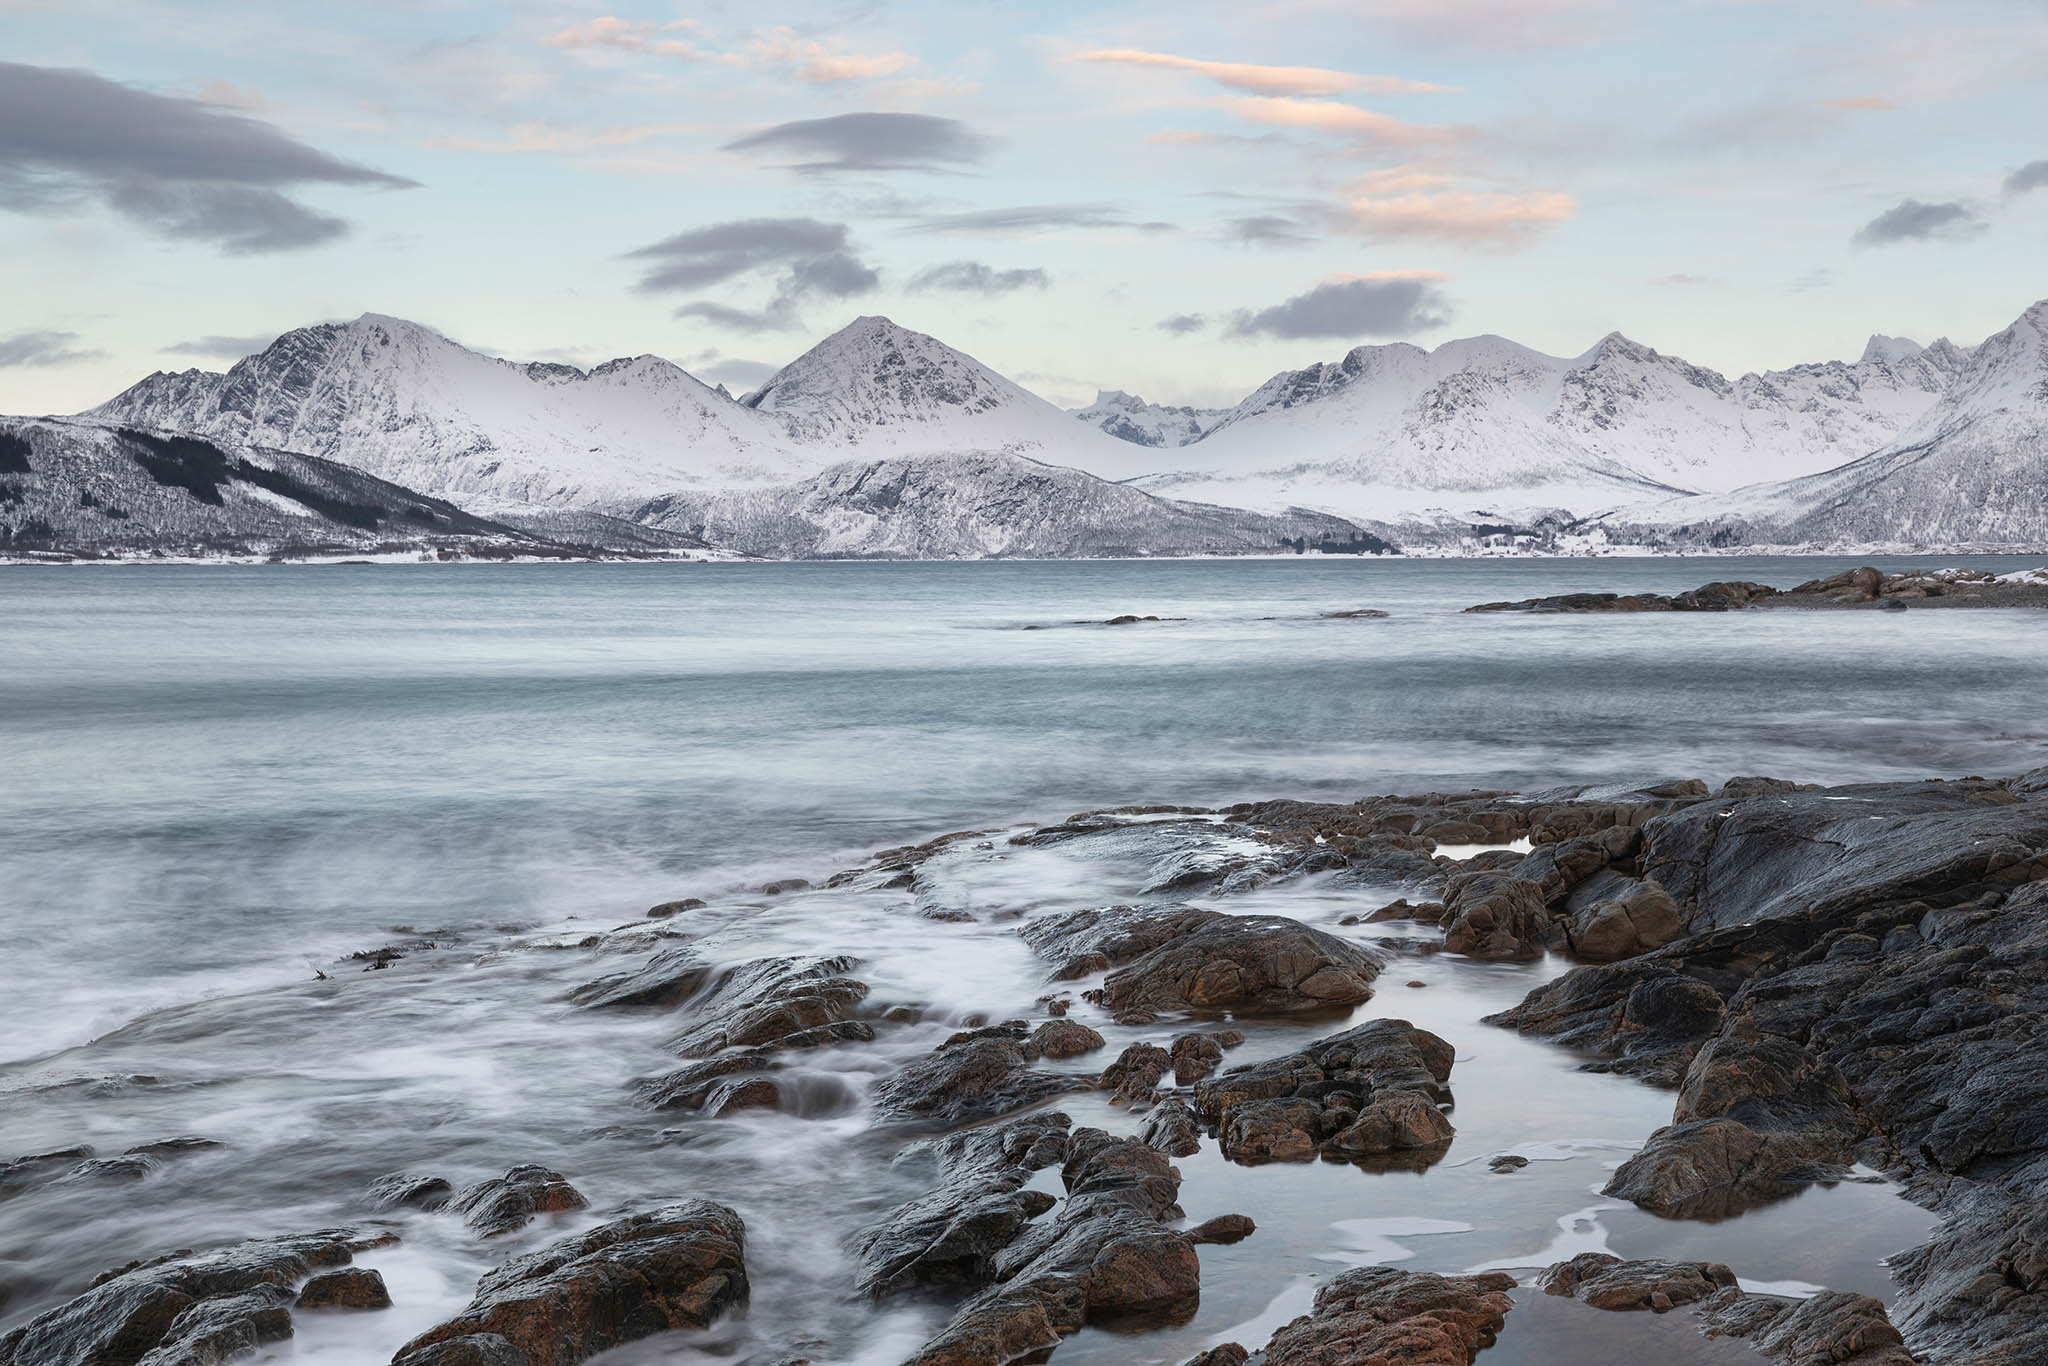 Snow covered mountains around the coastline near the island of Sommaroy in northern Norway.